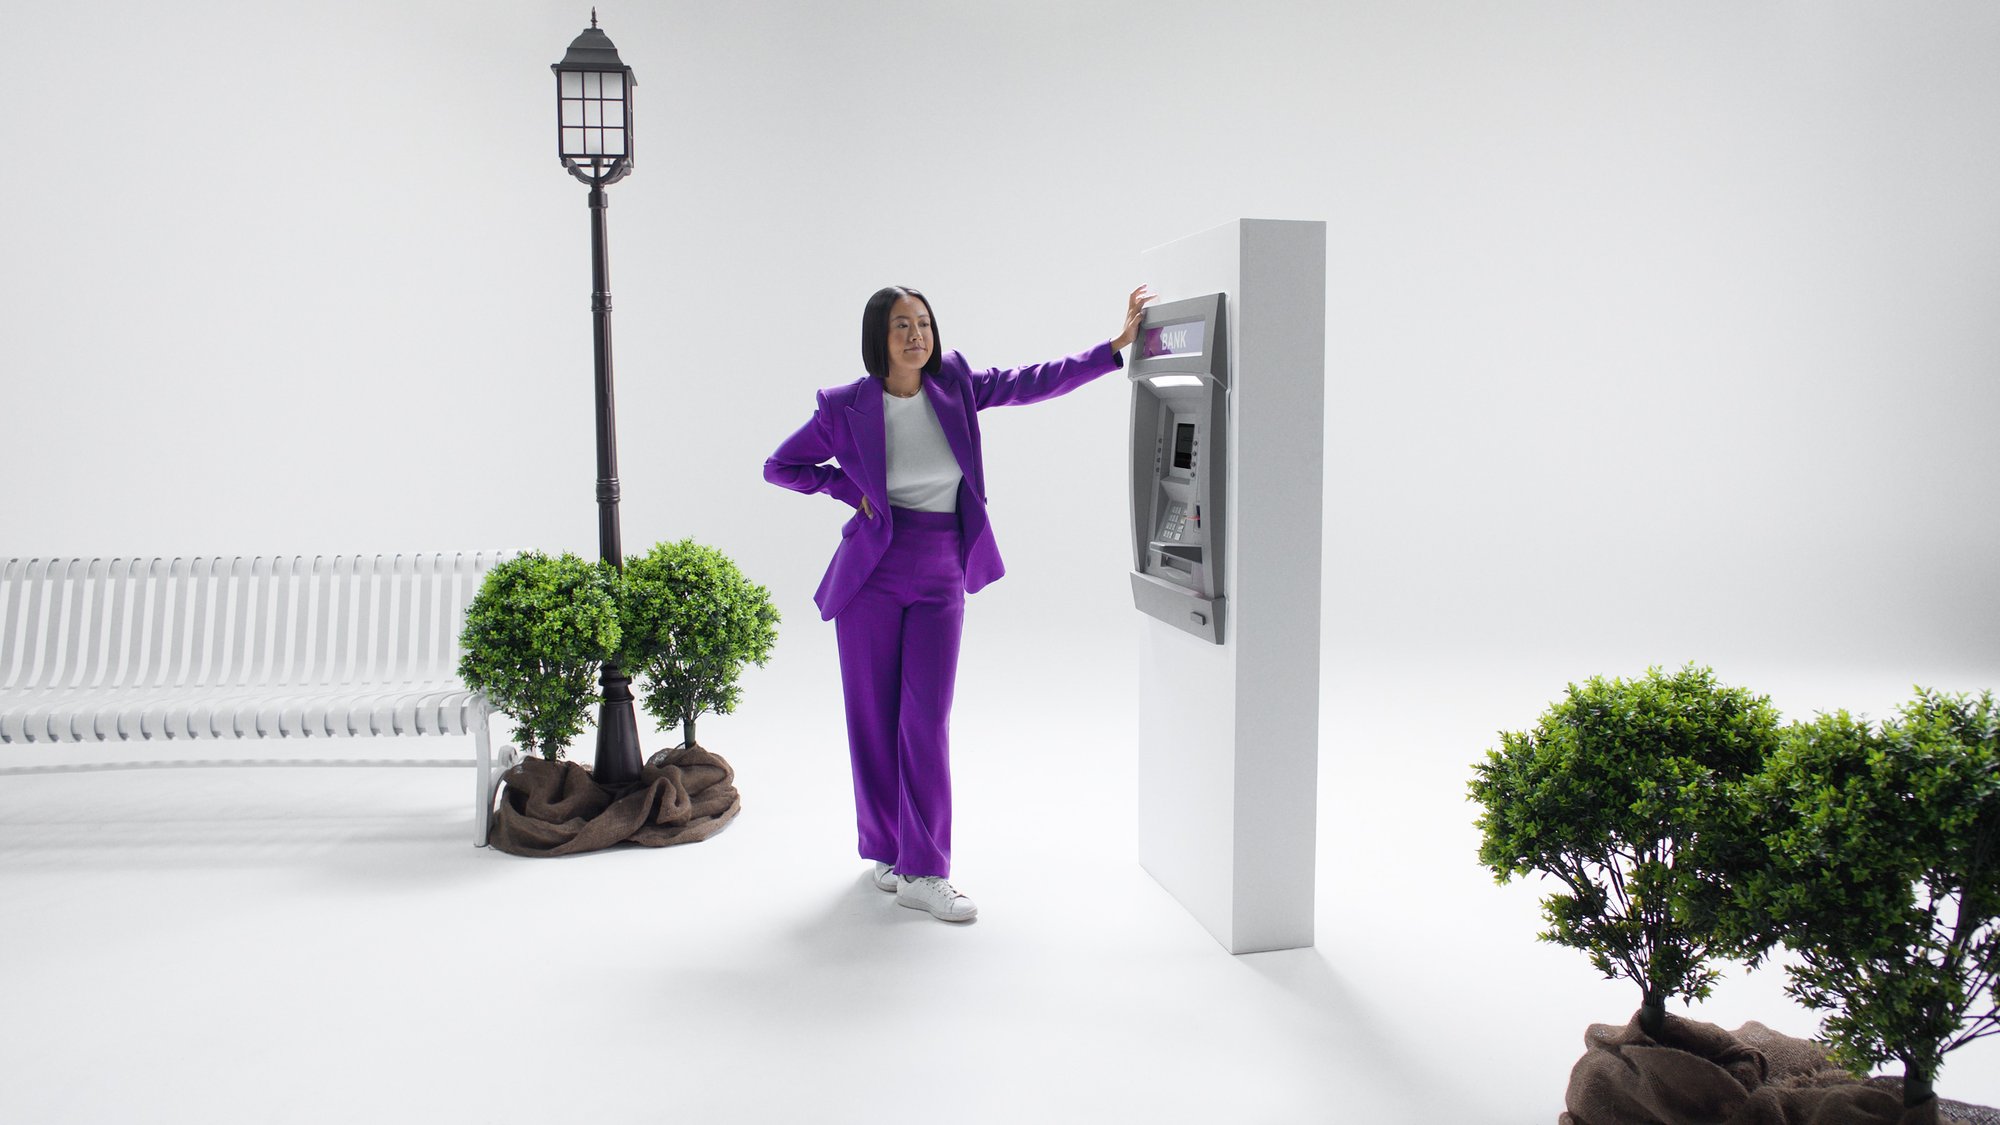 The woman, dressed in a chic purple ensemble, stands by the ATM, patiently waiting for it to respond.